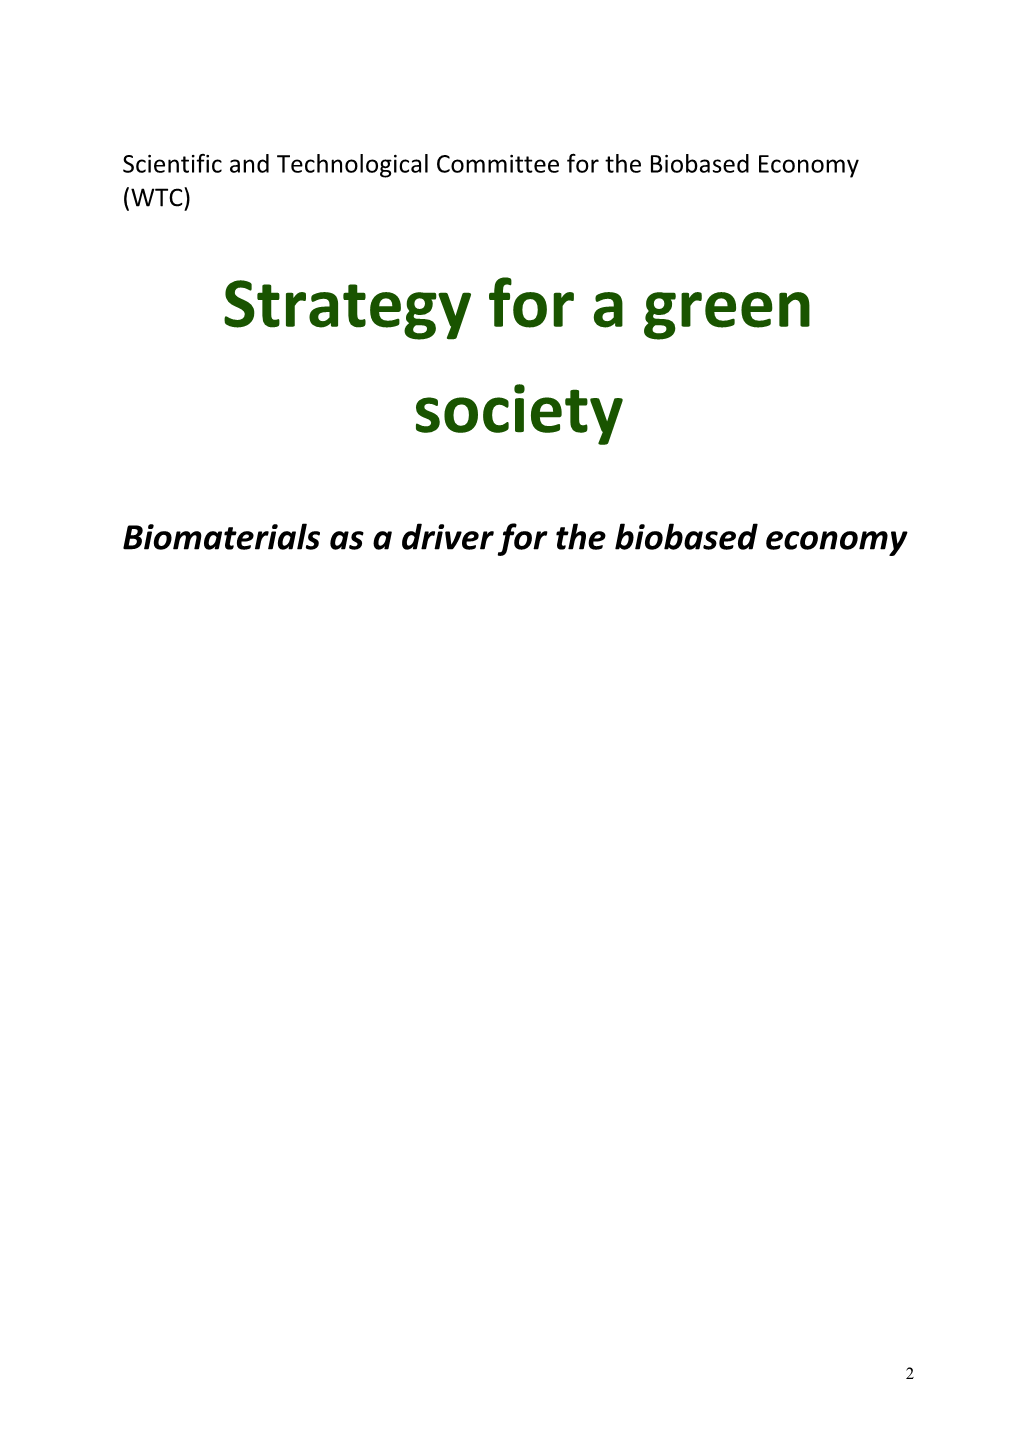 Scientific and Technological Committee for the Biobased Economy (WTC)